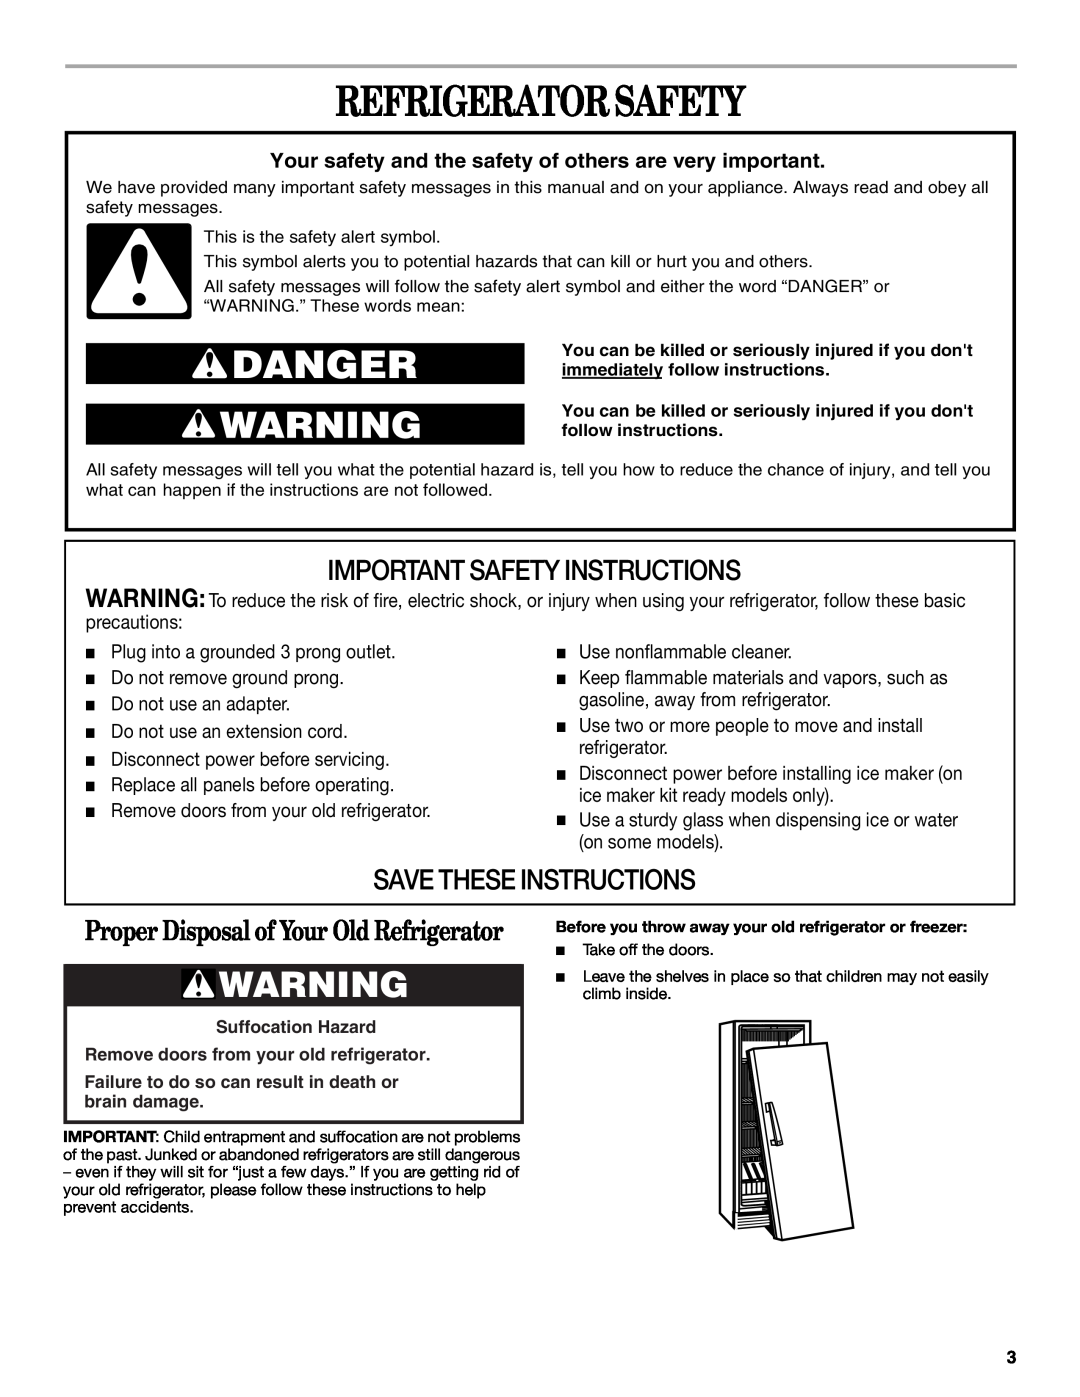 Whirlpool EL1WSRXLQ0 manual Refrigerator Safety, Proper Disposal of Your Old Refrigerator, Important Safety Instructions 